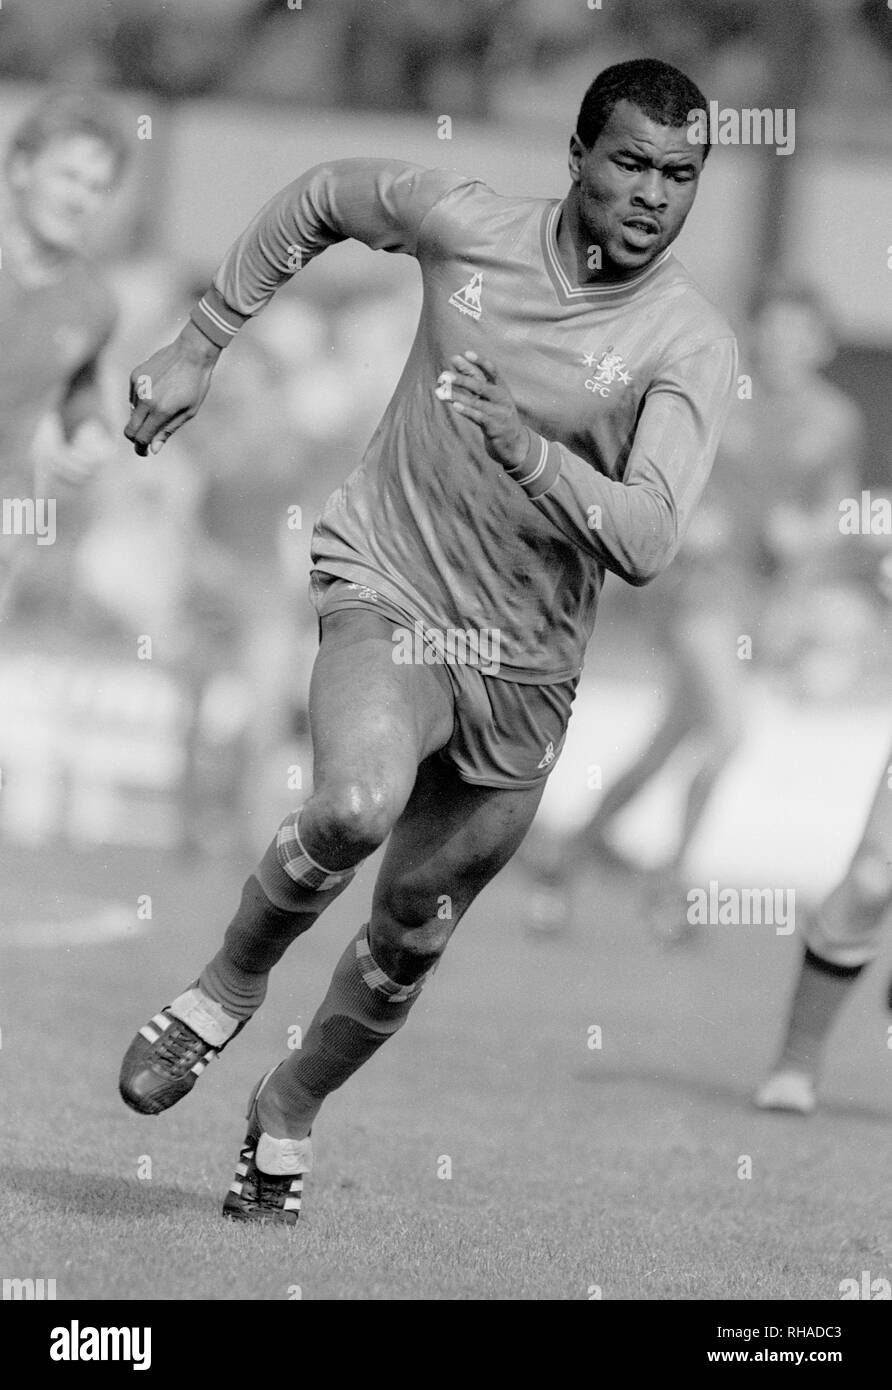 Paolo CANNOVILLE, Chelsea FC, , 1985 Foto Stock